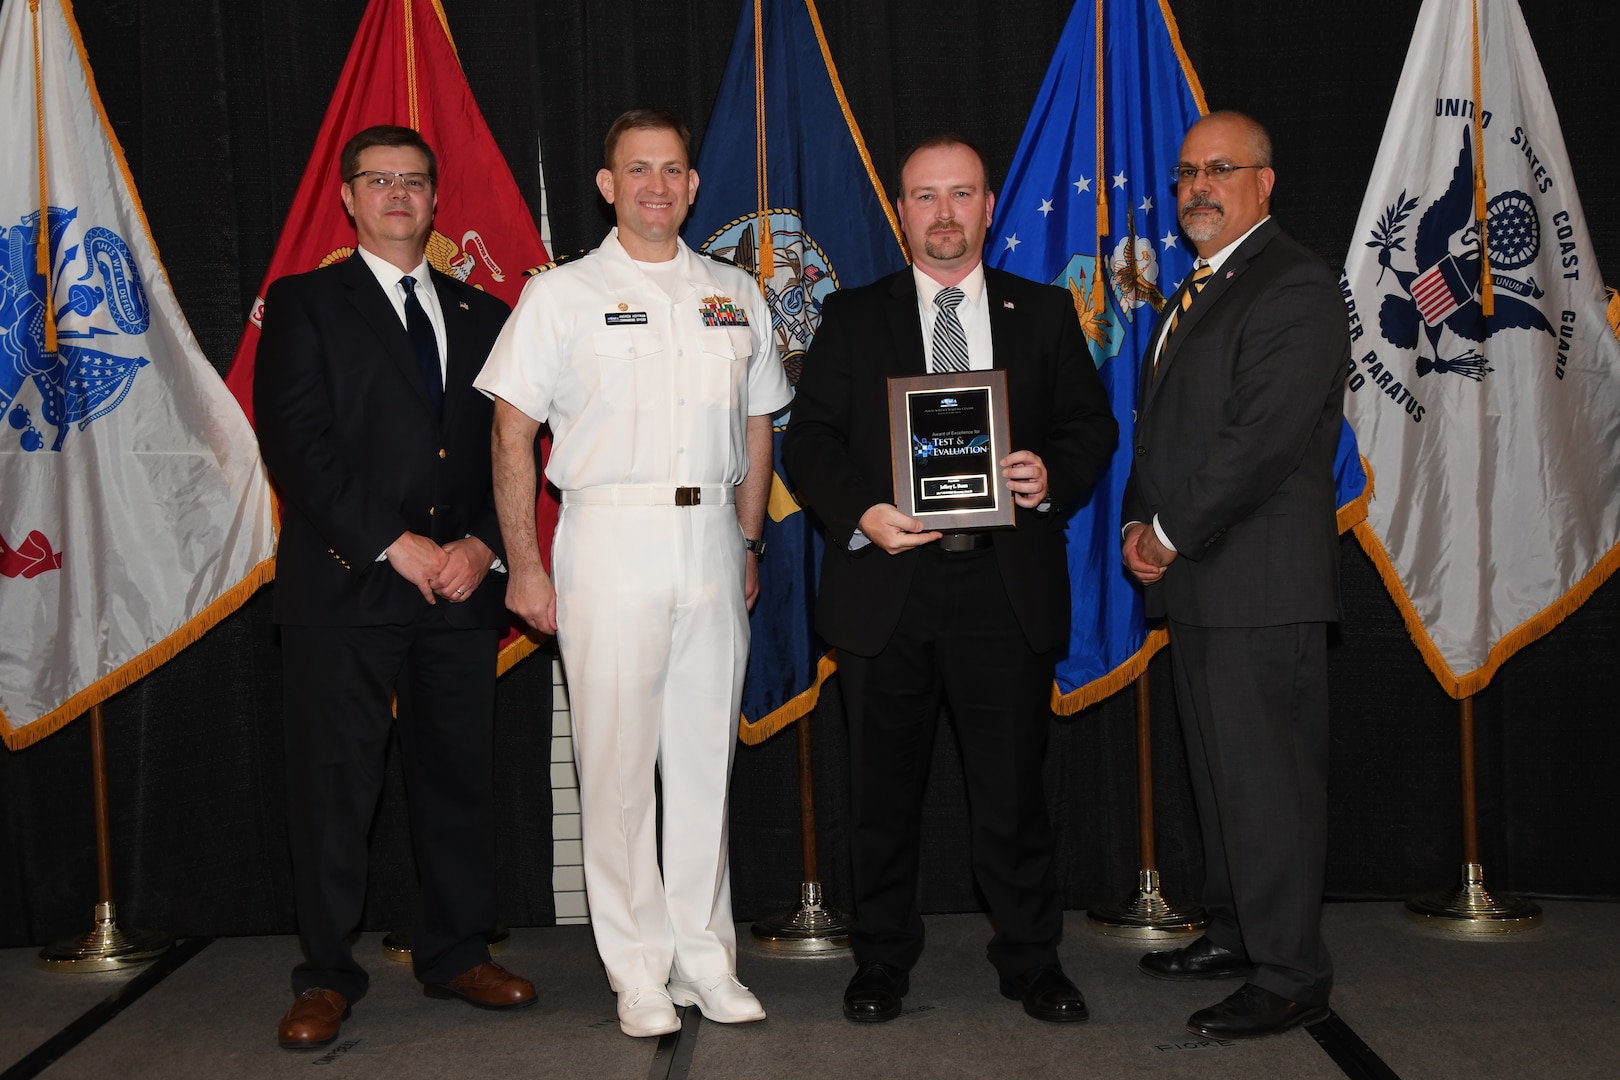 IMAGE: Jeffrey Bunn is presented the NSWCDD Award of Excellence for Test & Evaluation at Naval Surface Warfare Center Dahlgren Division's annual awards ceremony, Apr. 26 at the Fredericksburg Expo and Conference Center.

The NSWCDD Award of Excellence for Test & Evaluation was established to recognize individuals who have made a notable and significant impact to NSWCDD through their outstanding performance in Test and Evaluation, the collection, analysis, and assessment of data to characterize and/or measure the performance of a component, system, platform, or mission.